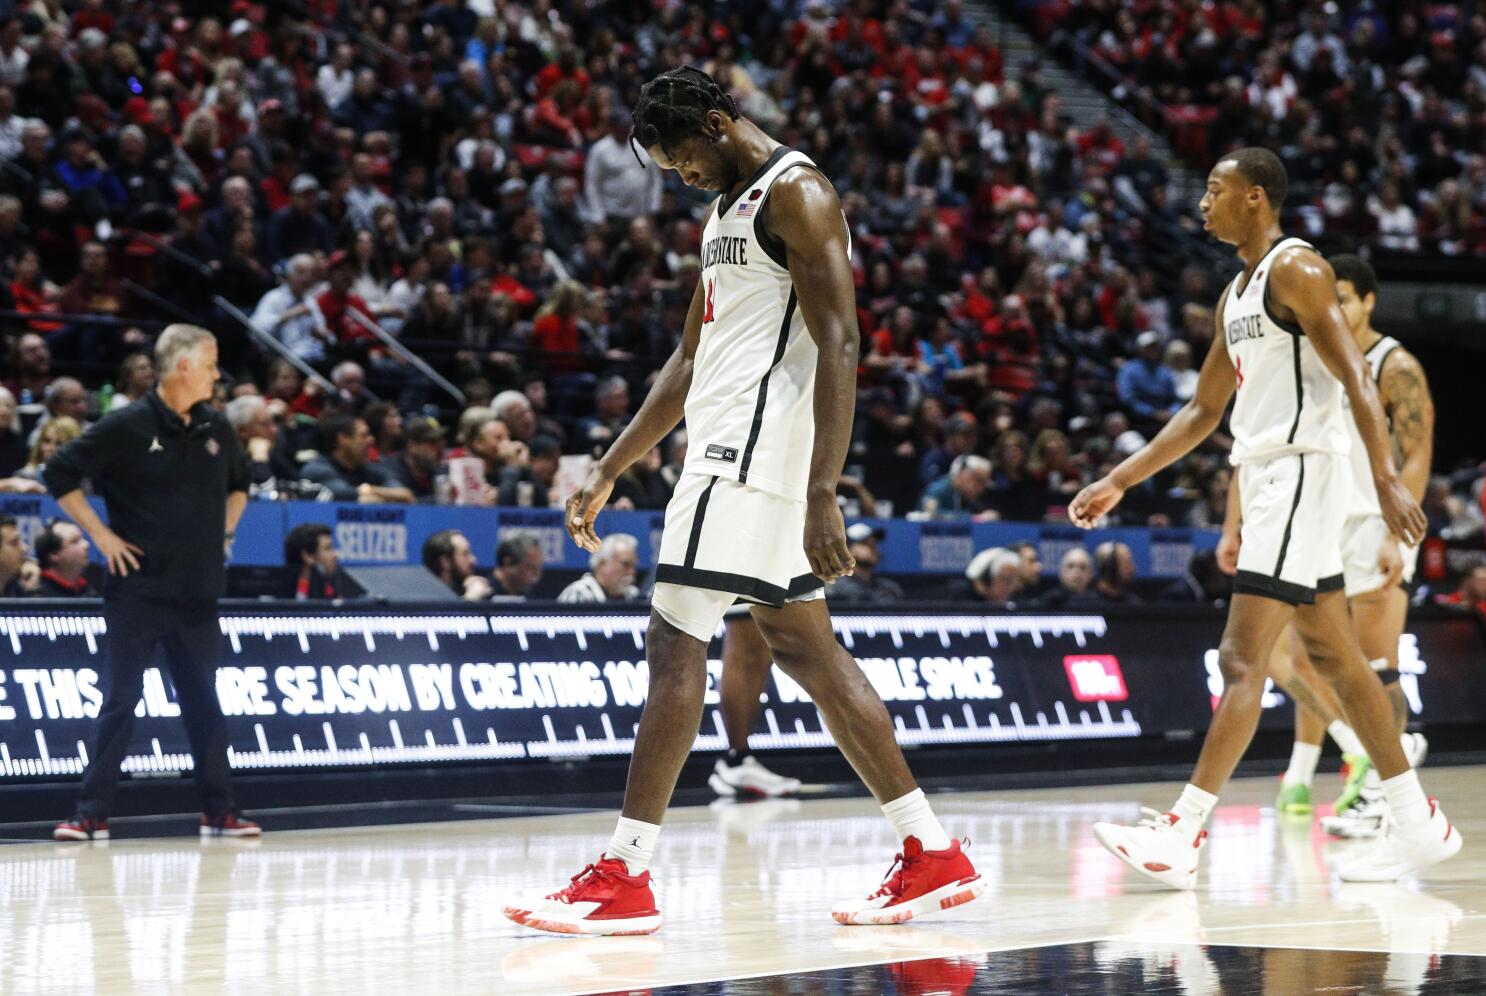 Compression tights taking over college basketball – The Daily Aztec